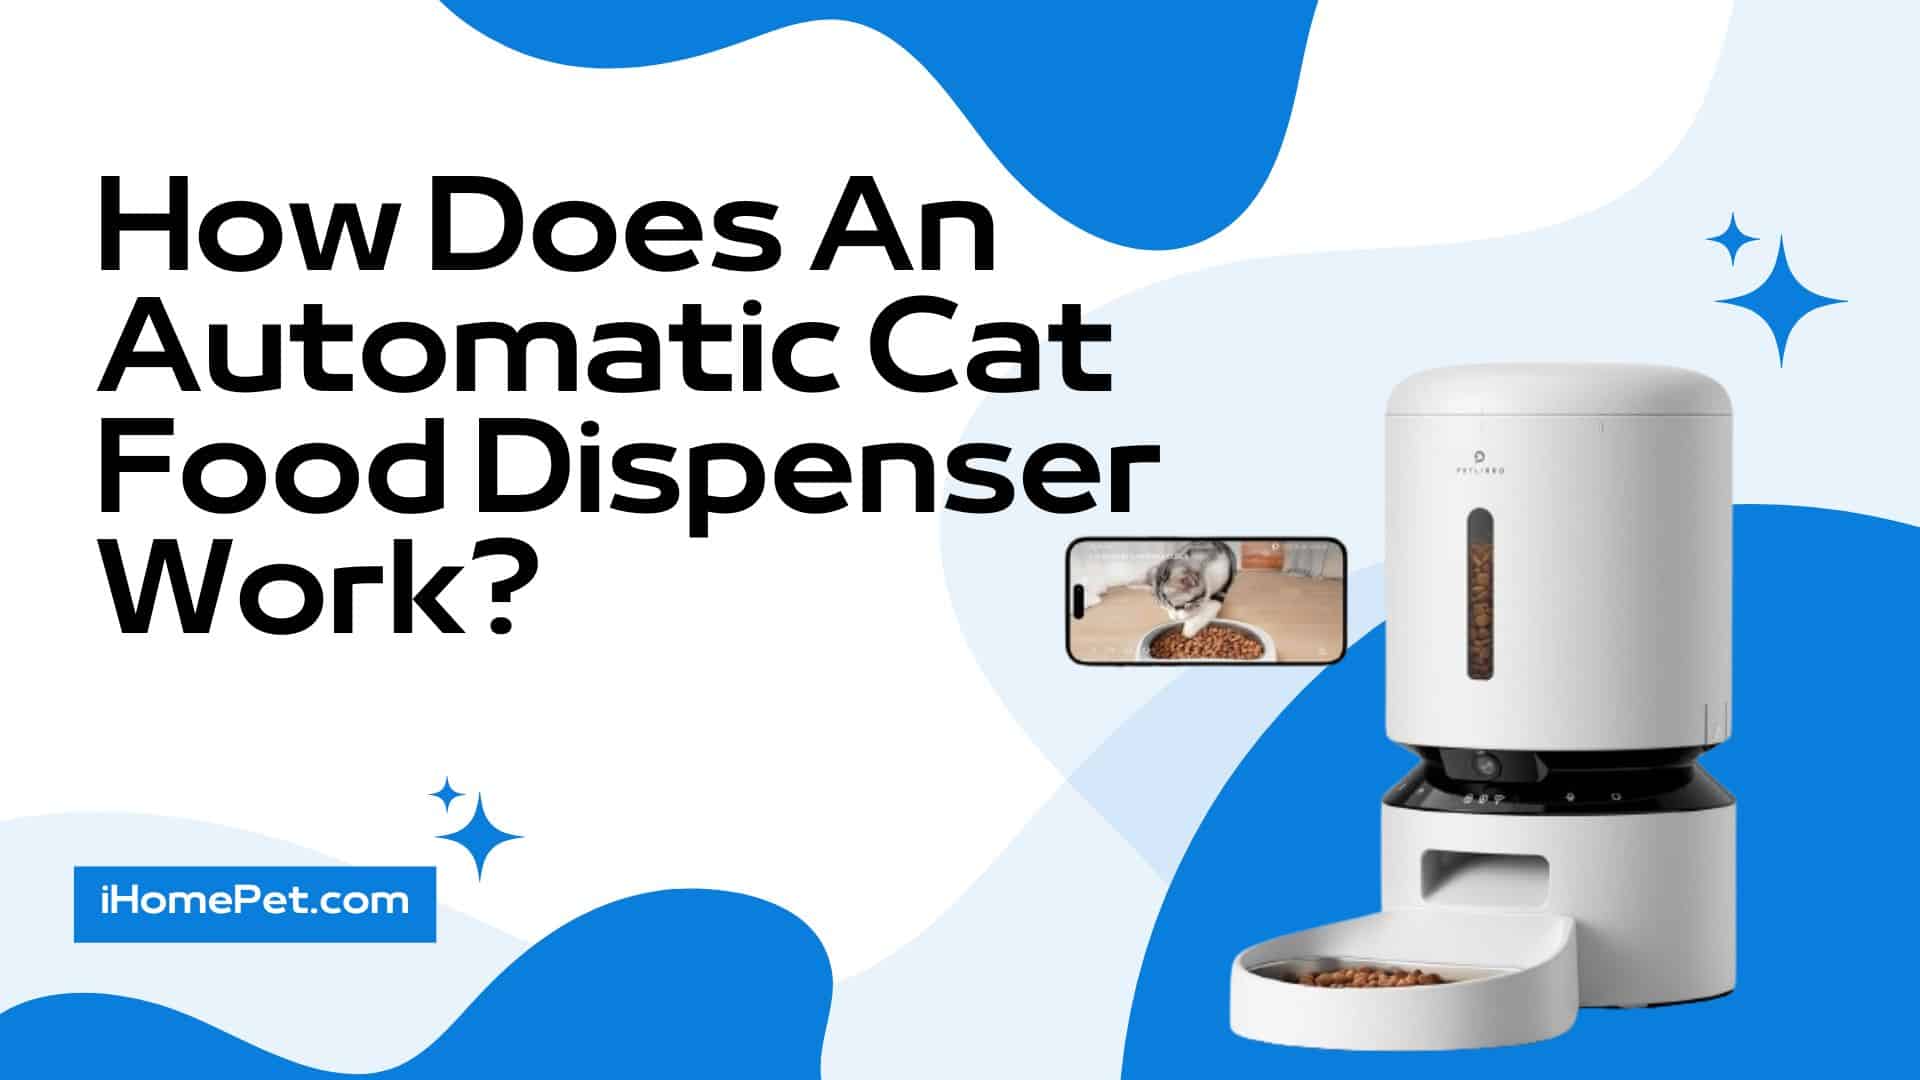 Use an automatic pet feeder for your feline friend